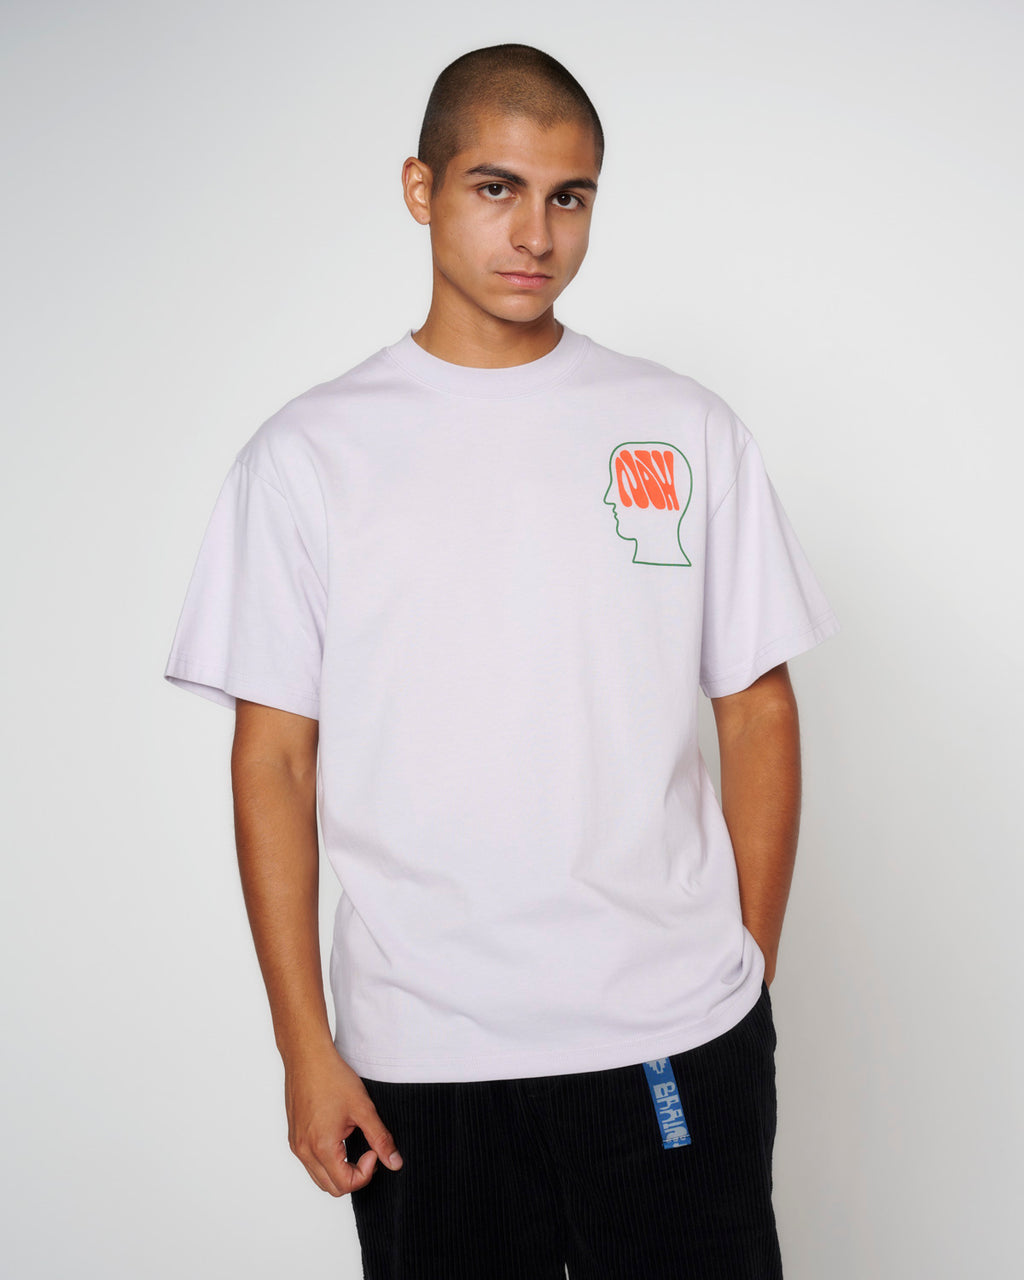 The Now Movement T-shirt - Lilac 4